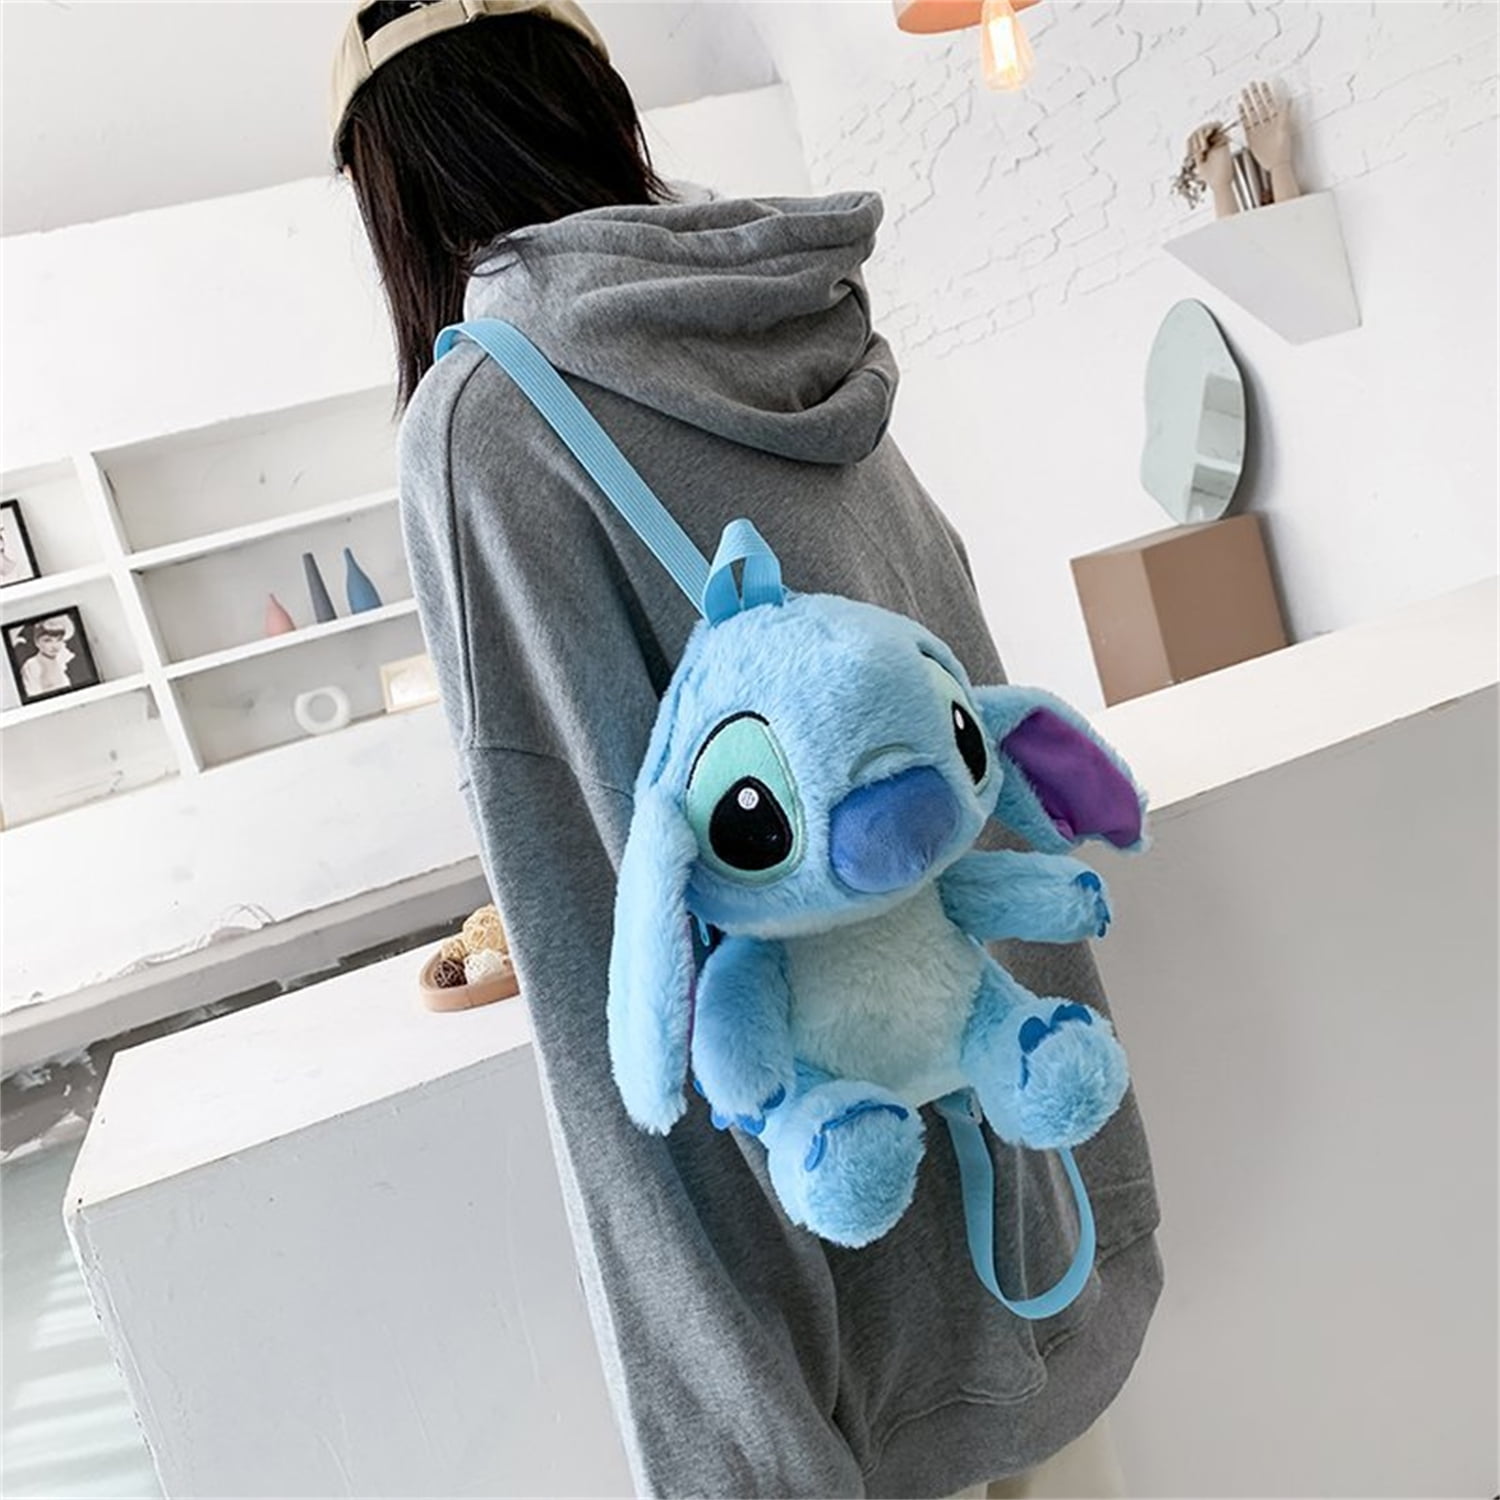 Lilo & Stitch Children Plush Backpack Toys New Girls Toy Kawaii Christmas  Gifts 